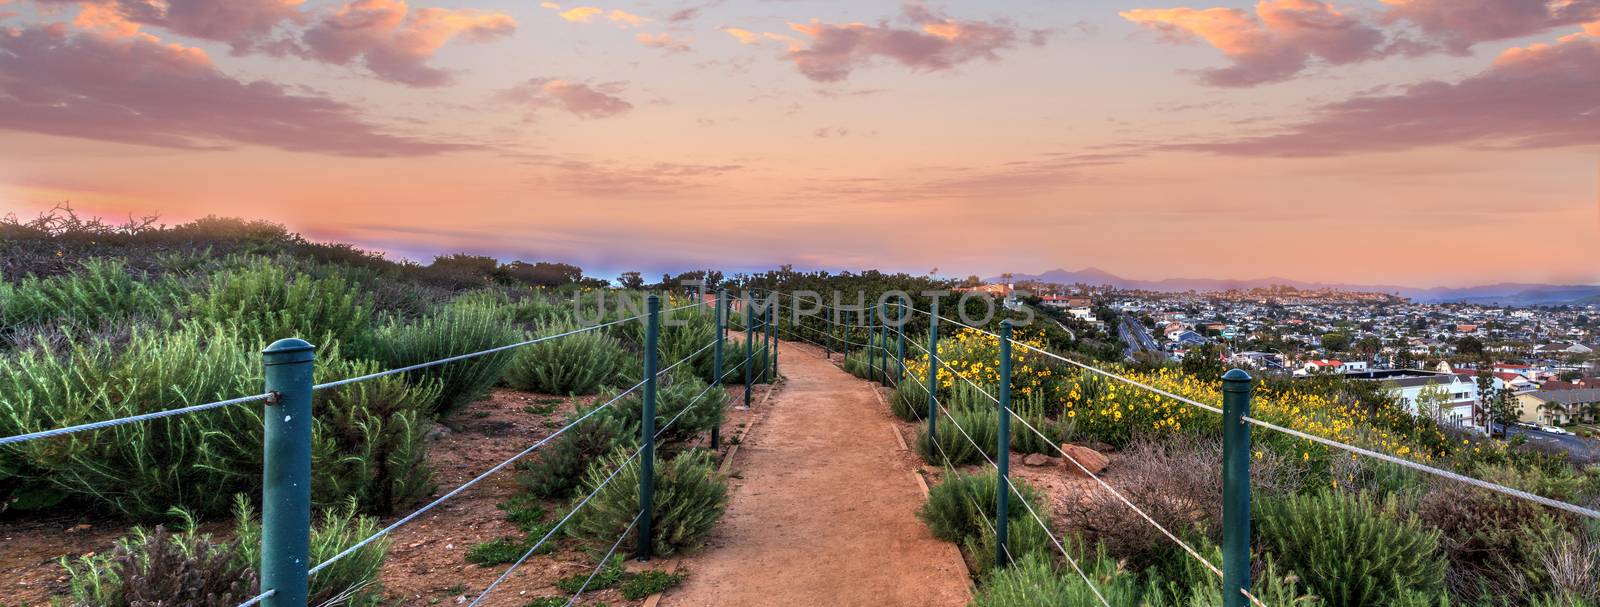 Hiking trail above Dana Point city view at sunset in Southern California, USA